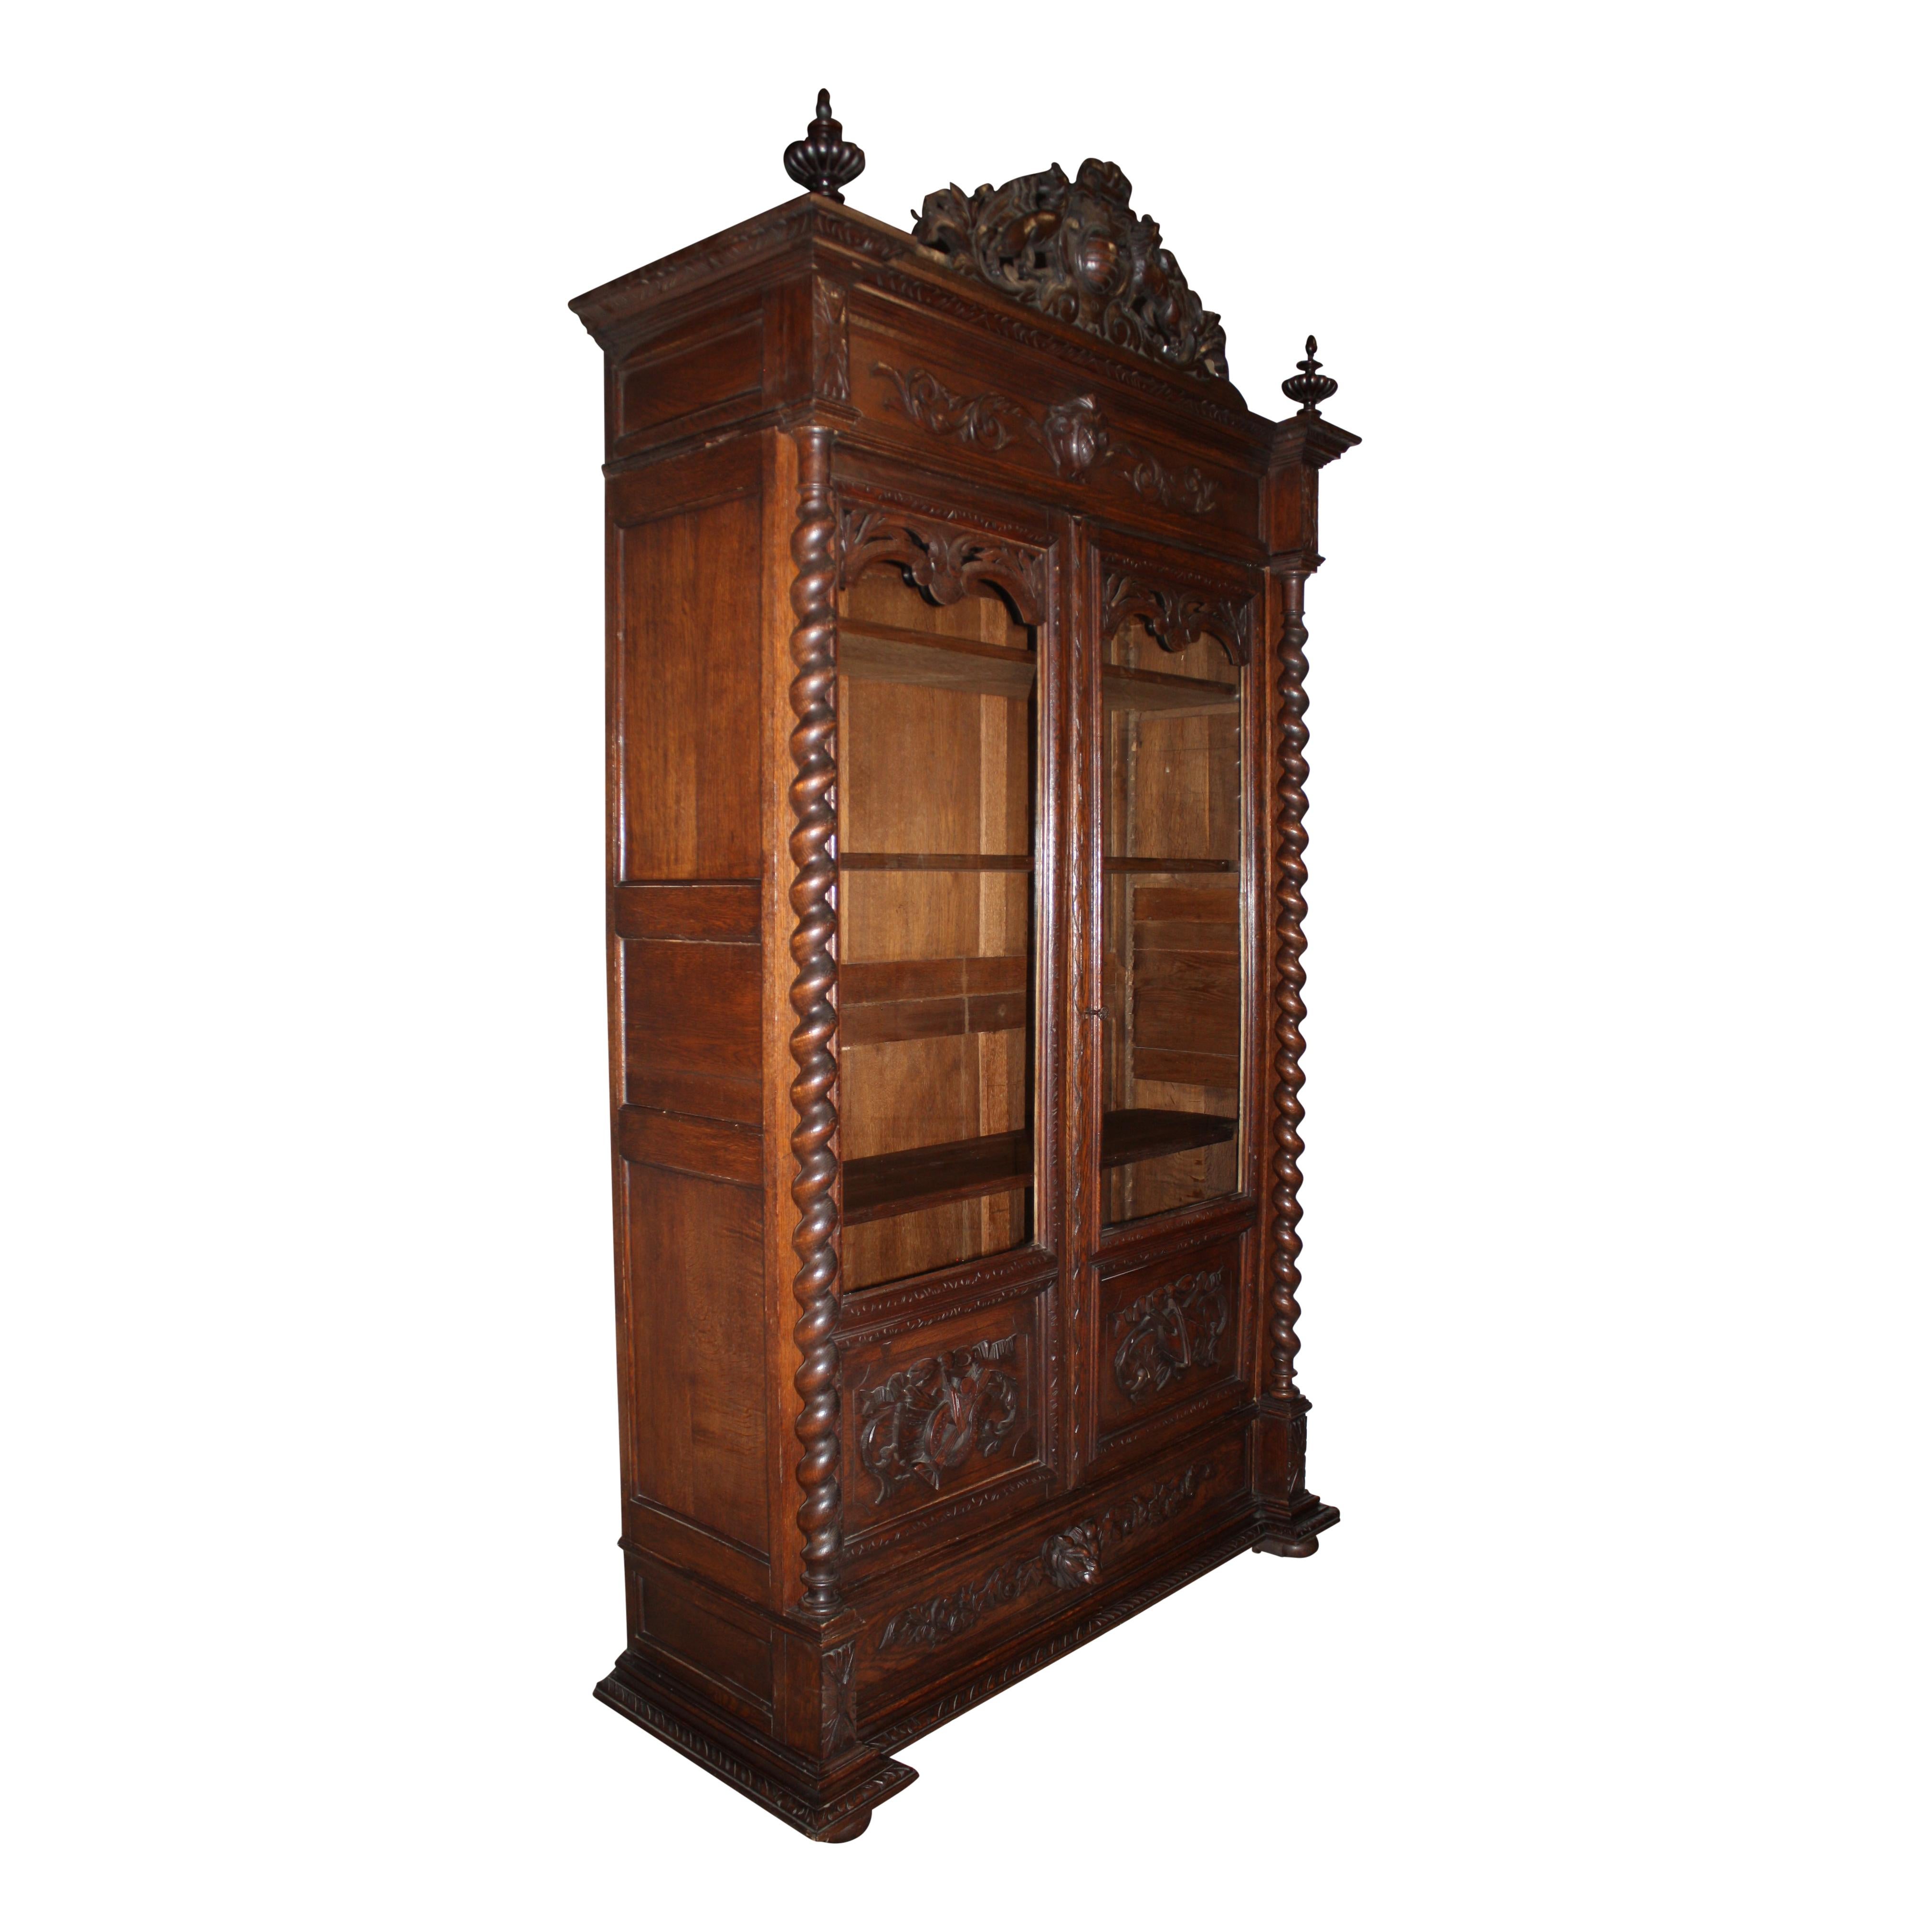 Embellished from top to bottom, this stunning bookcase features opposing griffins and gadrooning finials above a cornice of scrolled acanthus leaves around a central pineapple; lower door panels carved with a stringed instrument and an artist's